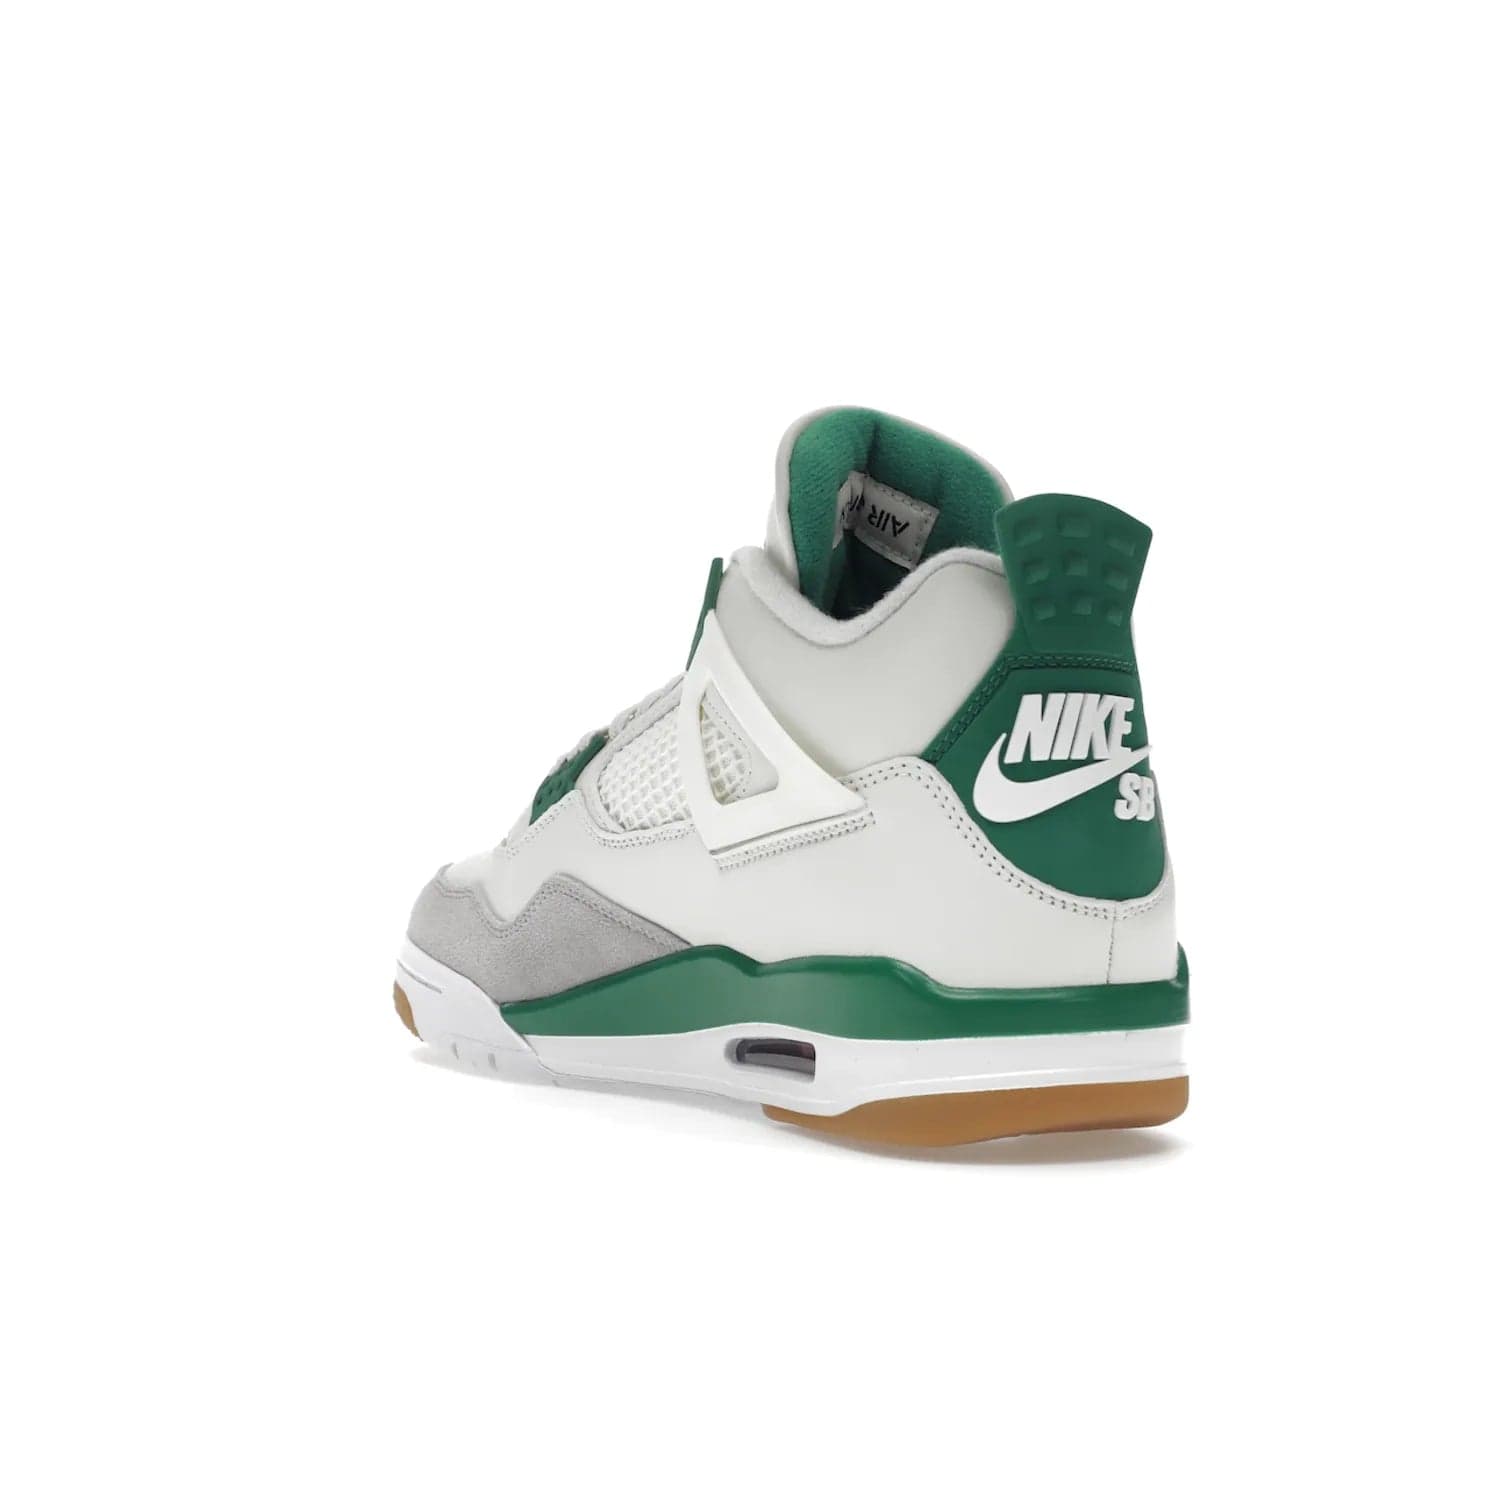 Jordan 4 Retro SB Pine Green - Image 25 - Only at www.BallersClubKickz.com - A white leather upper combined with a Neutral Grey suede mudguard gives this limited Air Jordan 4 Retro SB Pine Green sneaker its unmistakable style. Released March 20, 2023, the Jordan 4 Retro SB features a white and Pine Green midsole plus a red air unit with a gum outsole for grip. The perfect blend of Nike SB skateboarding and Jordan 4 classic design.